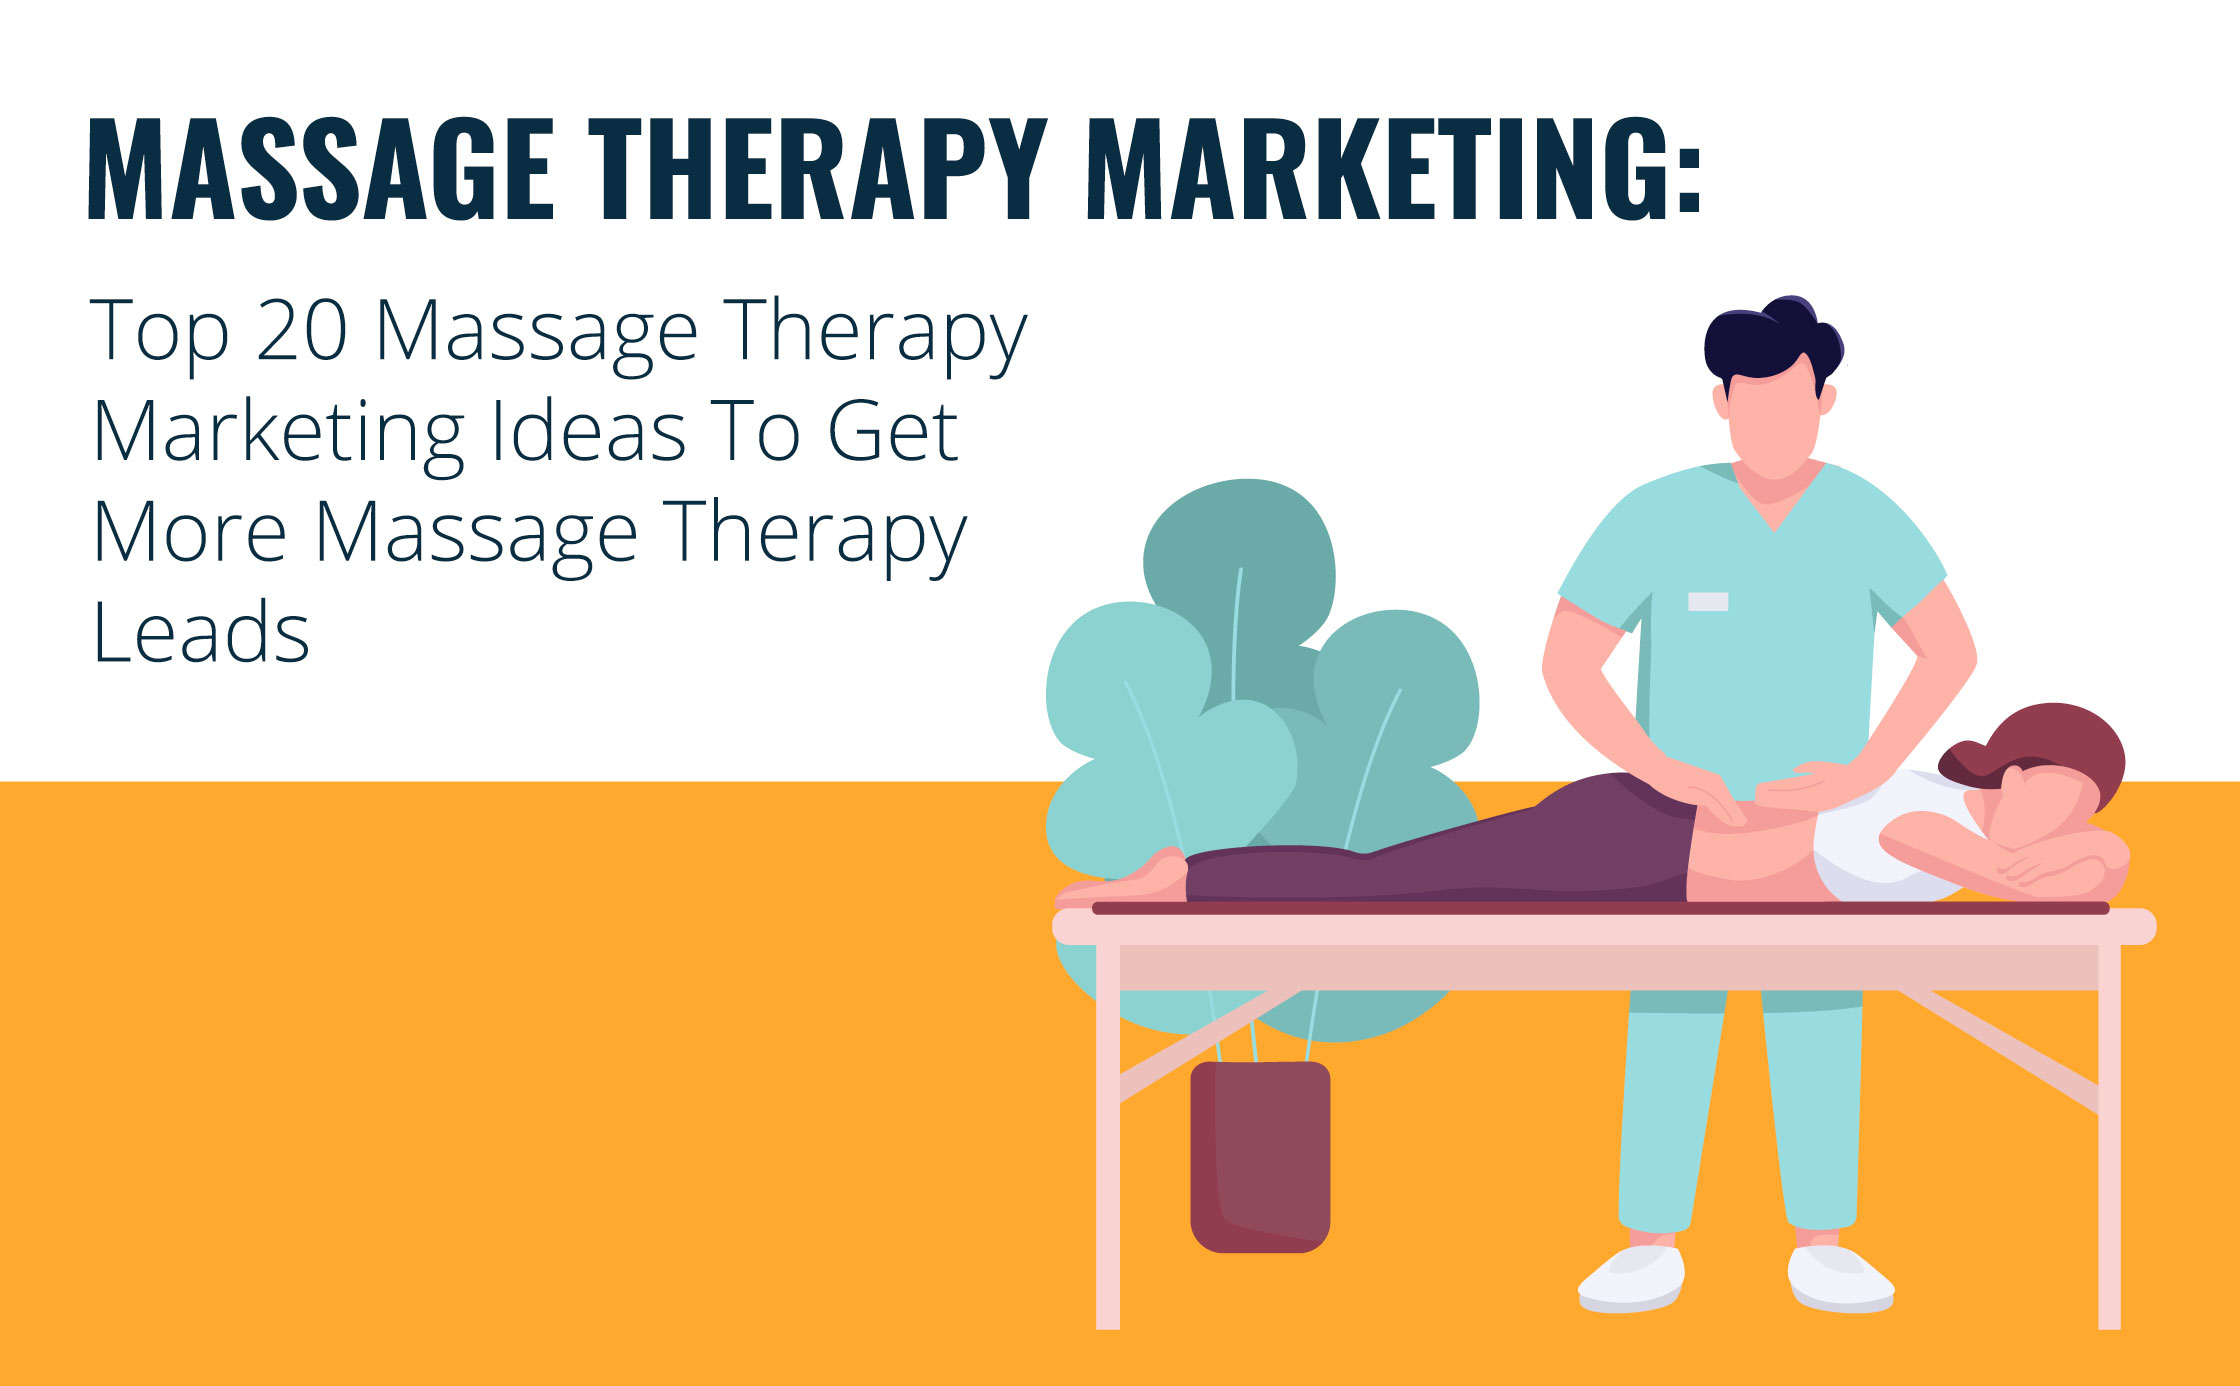 Top 20 Massage Therapy Marketing Ideas To Get More Massage Therapy Leads